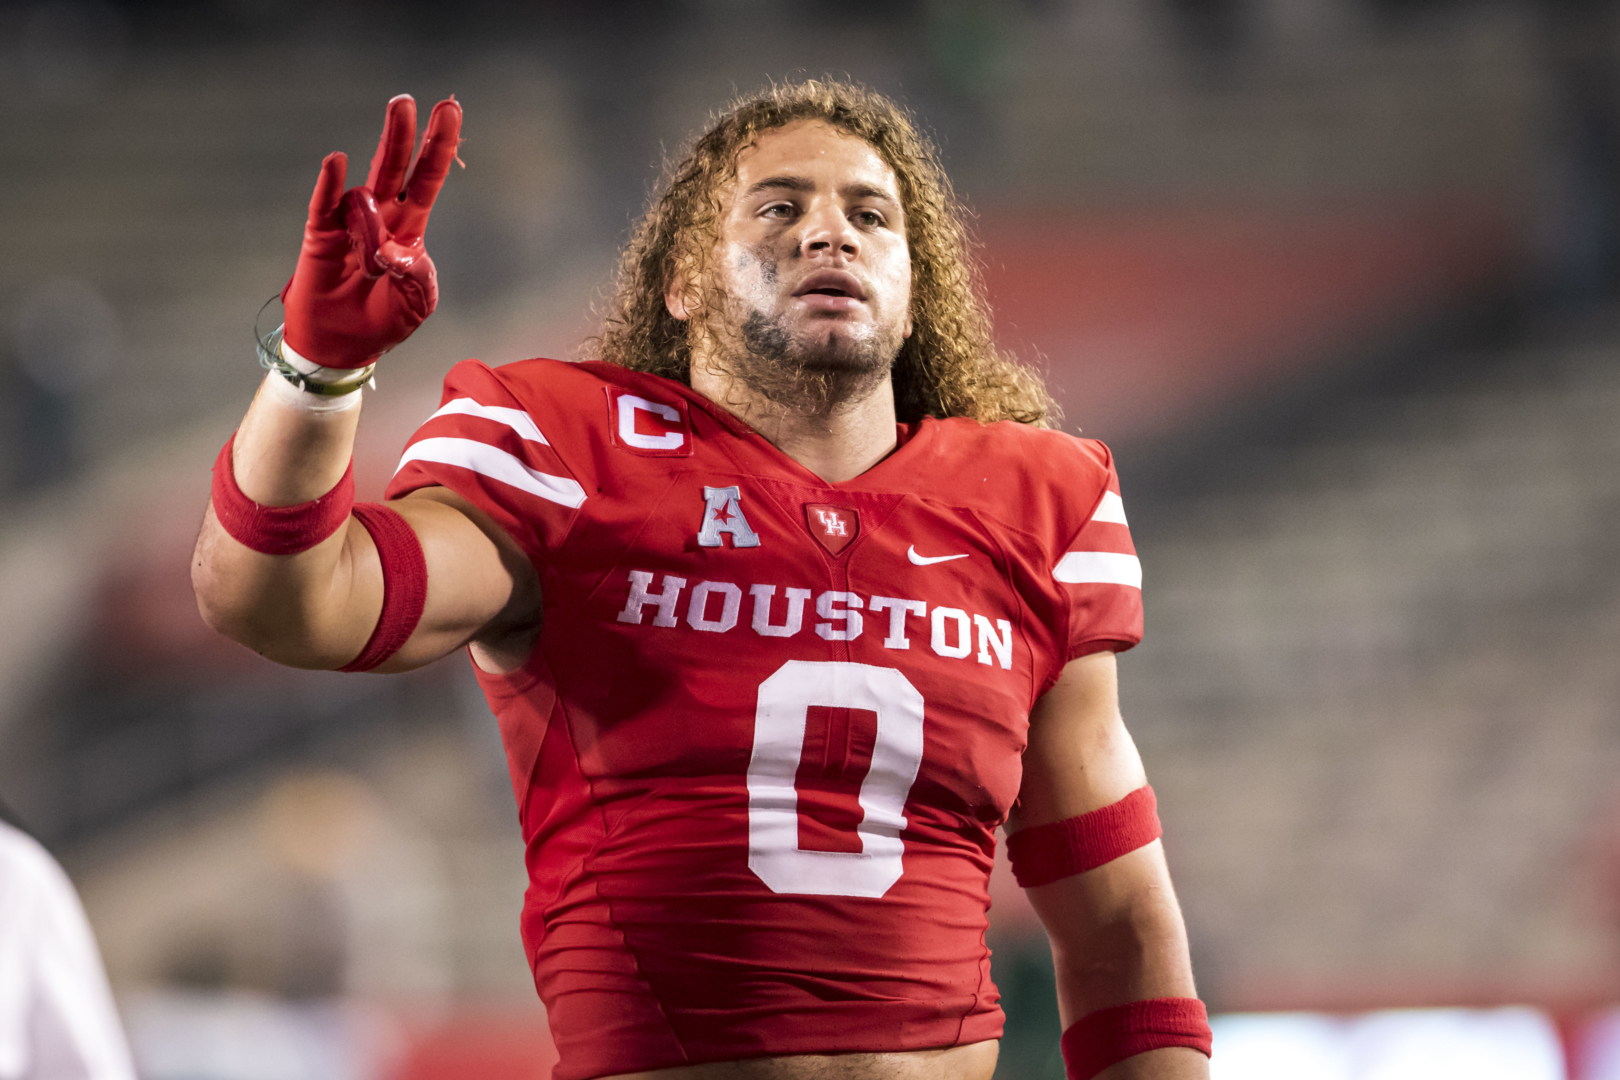 Senior linebacker Grant Stuard throws up the Cougar paw after UH's victory over Tulane | Courtesy of UH athletics